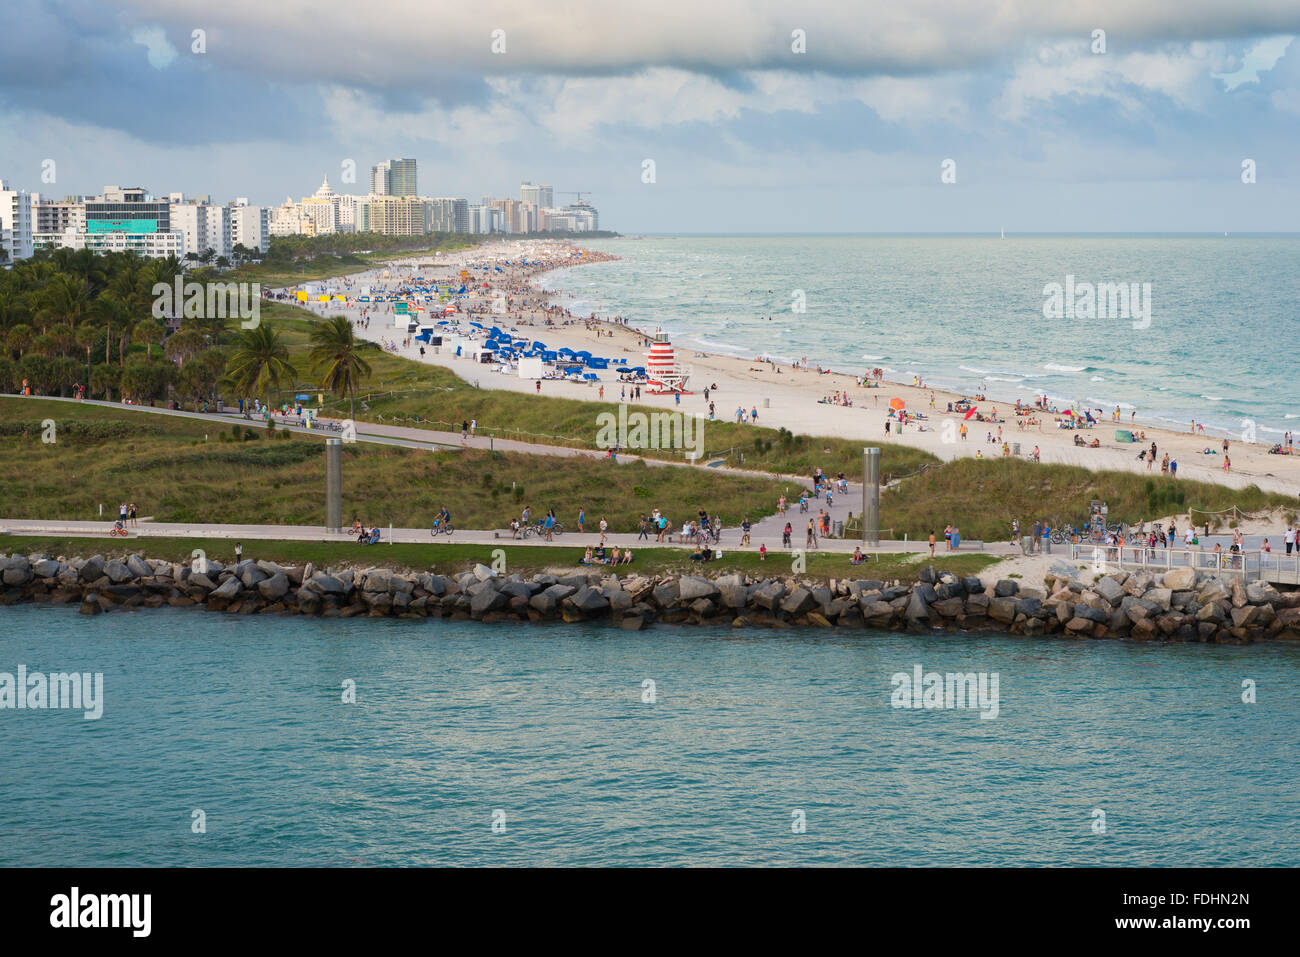 Miami South Beach from the Main Channel, Miami, Florida Stock Photo